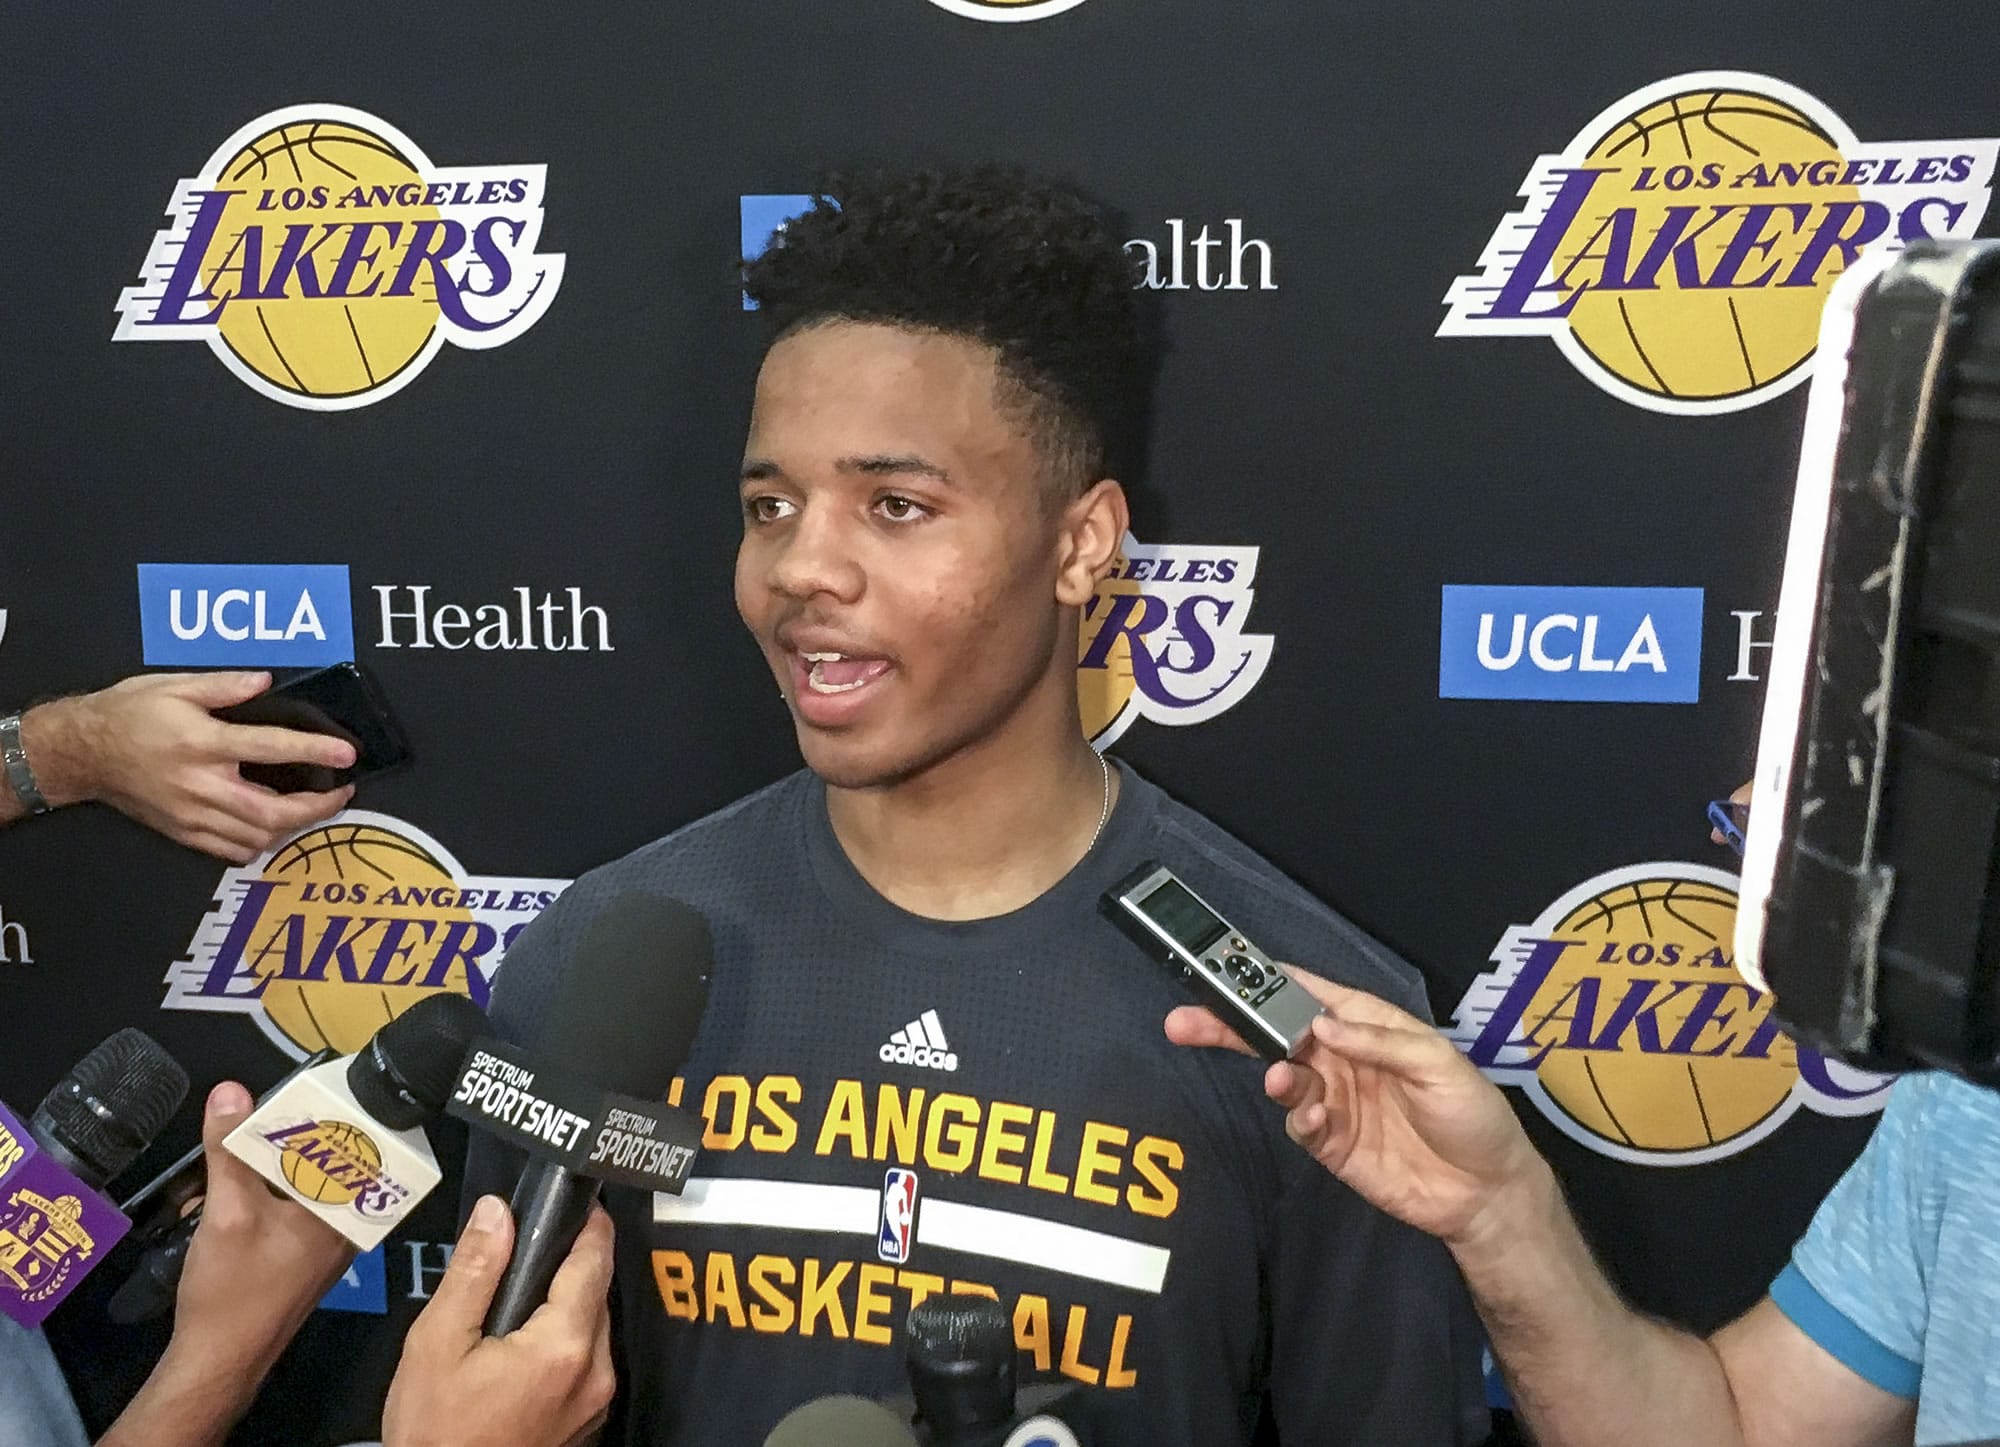 Markelle Fultz speaks with reporters after his private workout with the Los Angeles Lakers. Fultz is expected to be a top pick at the NBA Draft on Thursday, June 22.